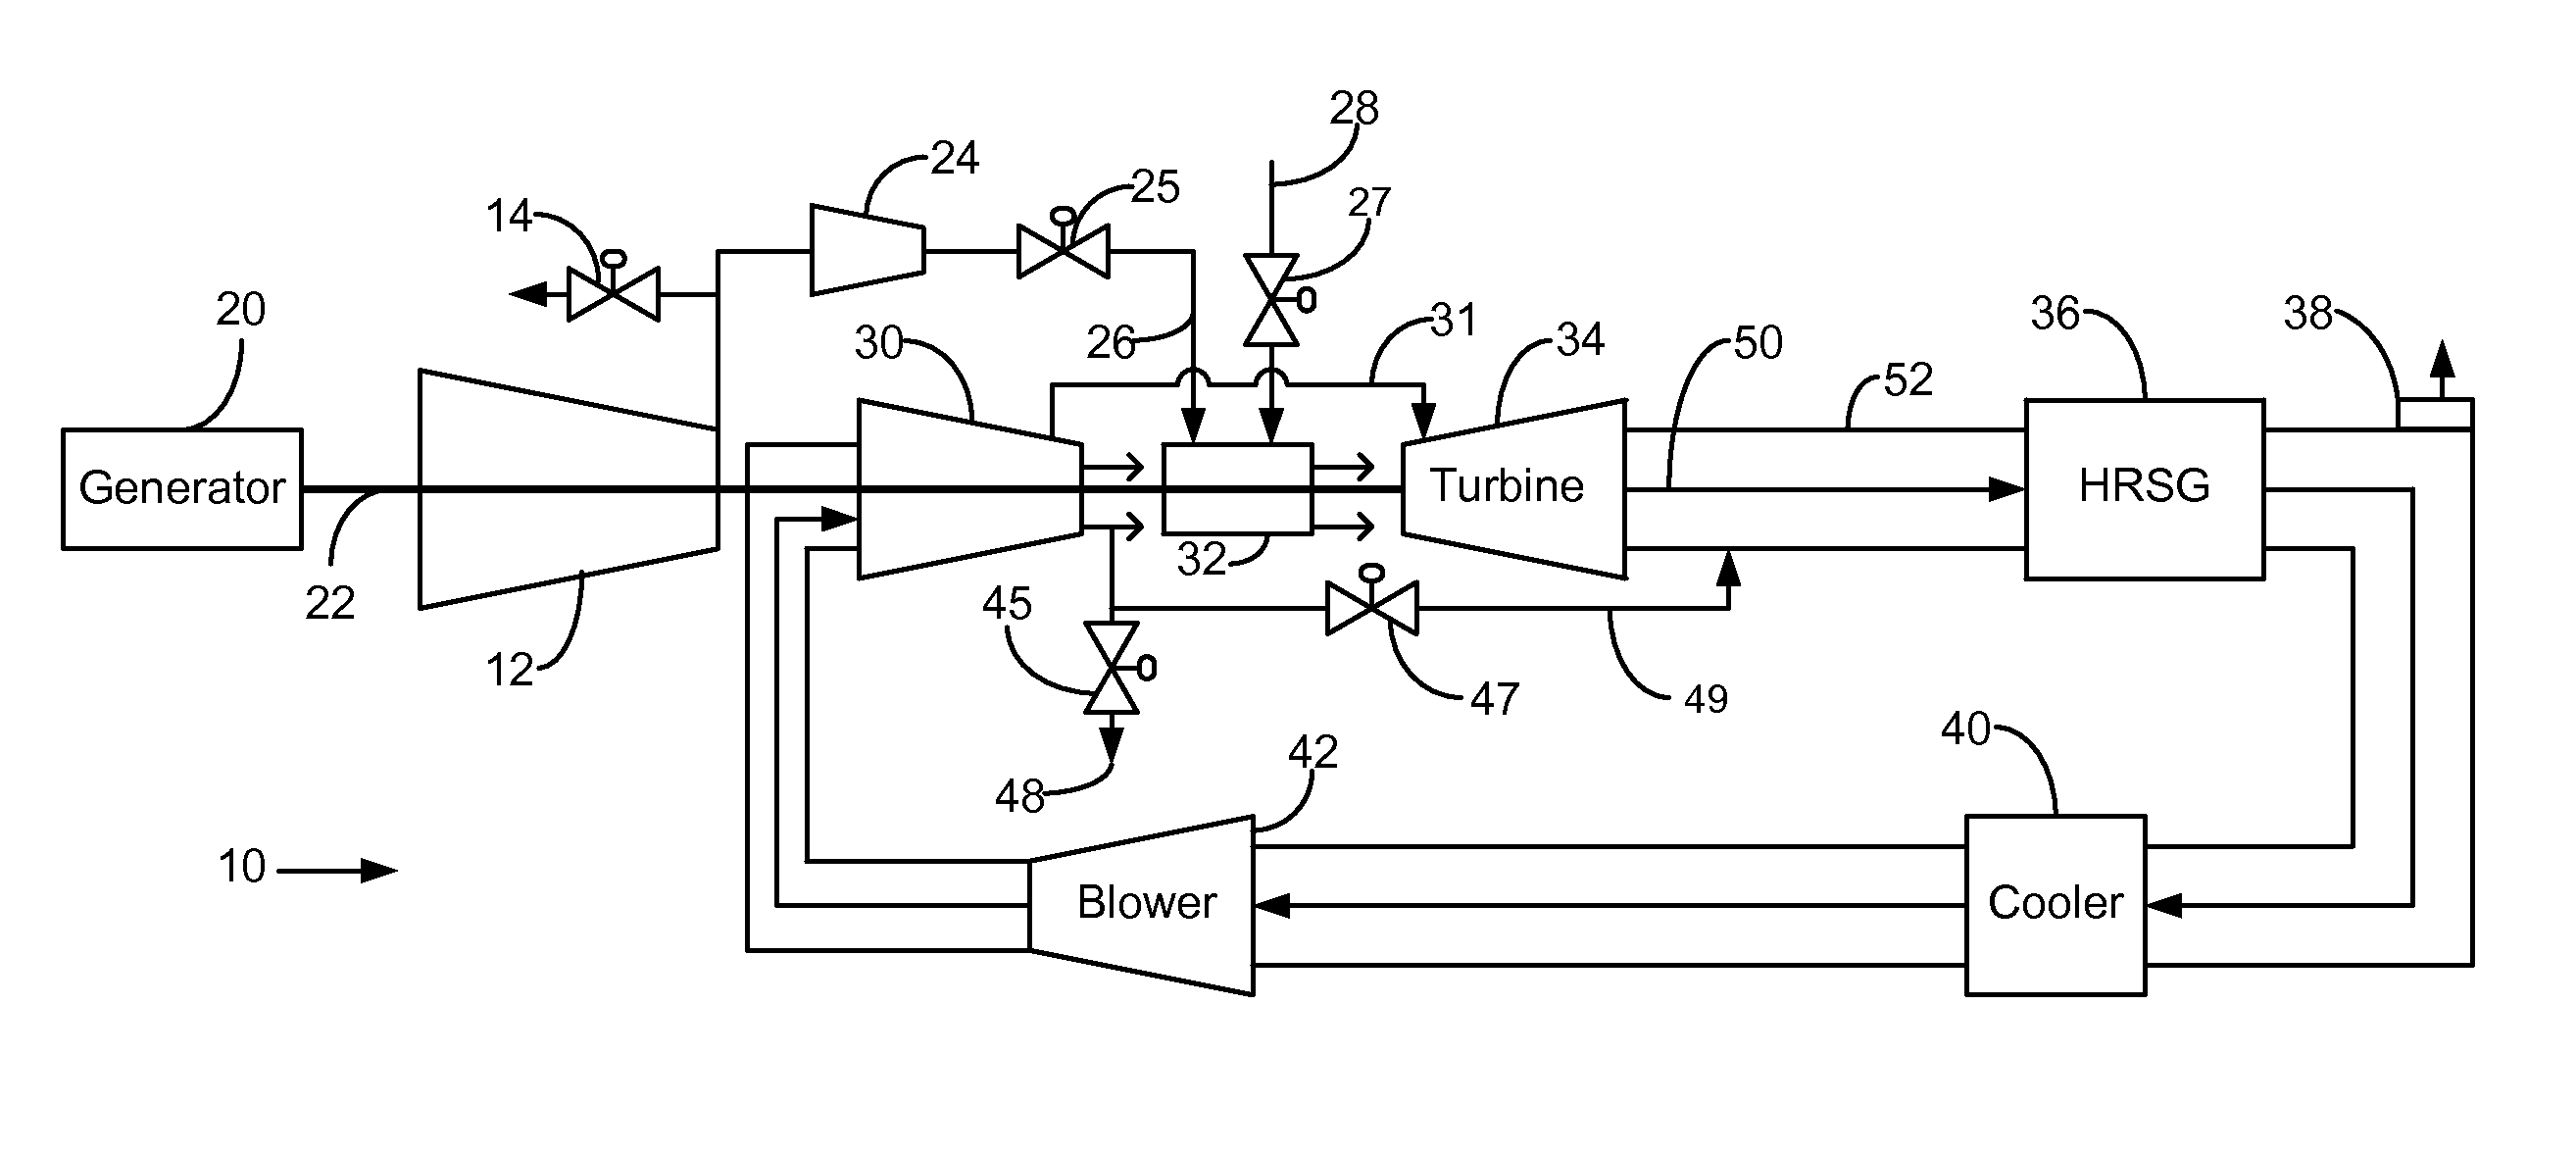 Power plant start-up method and method of venting the power plant